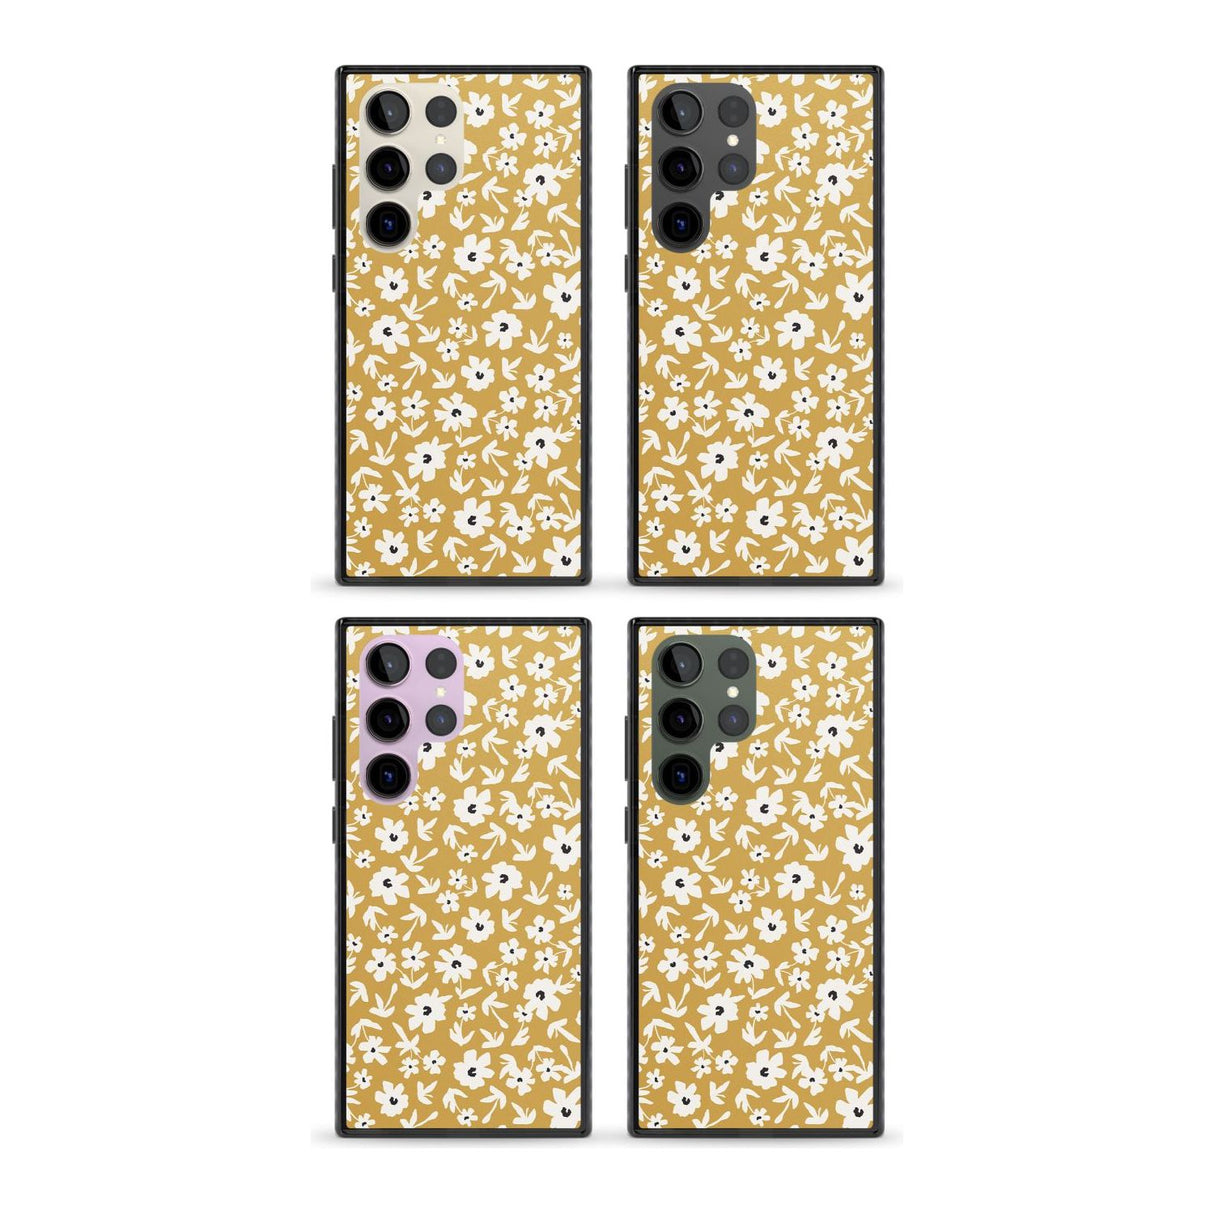 Floral Print on Mustard Cute Floral Phone Case iPhone 15 Pro Max / Black Impact Case,iPhone 15 Plus / Black Impact Case,iPhone 15 Pro / Black Impact Case,iPhone 15 / Black Impact Case,iPhone 15 Pro Max / Impact Case,iPhone 15 Plus / Impact Case,iPhone 15 Pro / Impact Case,iPhone 15 / Impact Case,iPhone 15 Pro Max / Magsafe Black Impact Case,iPhone 15 Plus / Magsafe Black Impact Case,iPhone 15 Pro / Magsafe Black Impact Case,iPhone 15 / Magsafe Black Impact Case,iPhone 14 Pro Max / Black Impact Case,iPhone 1